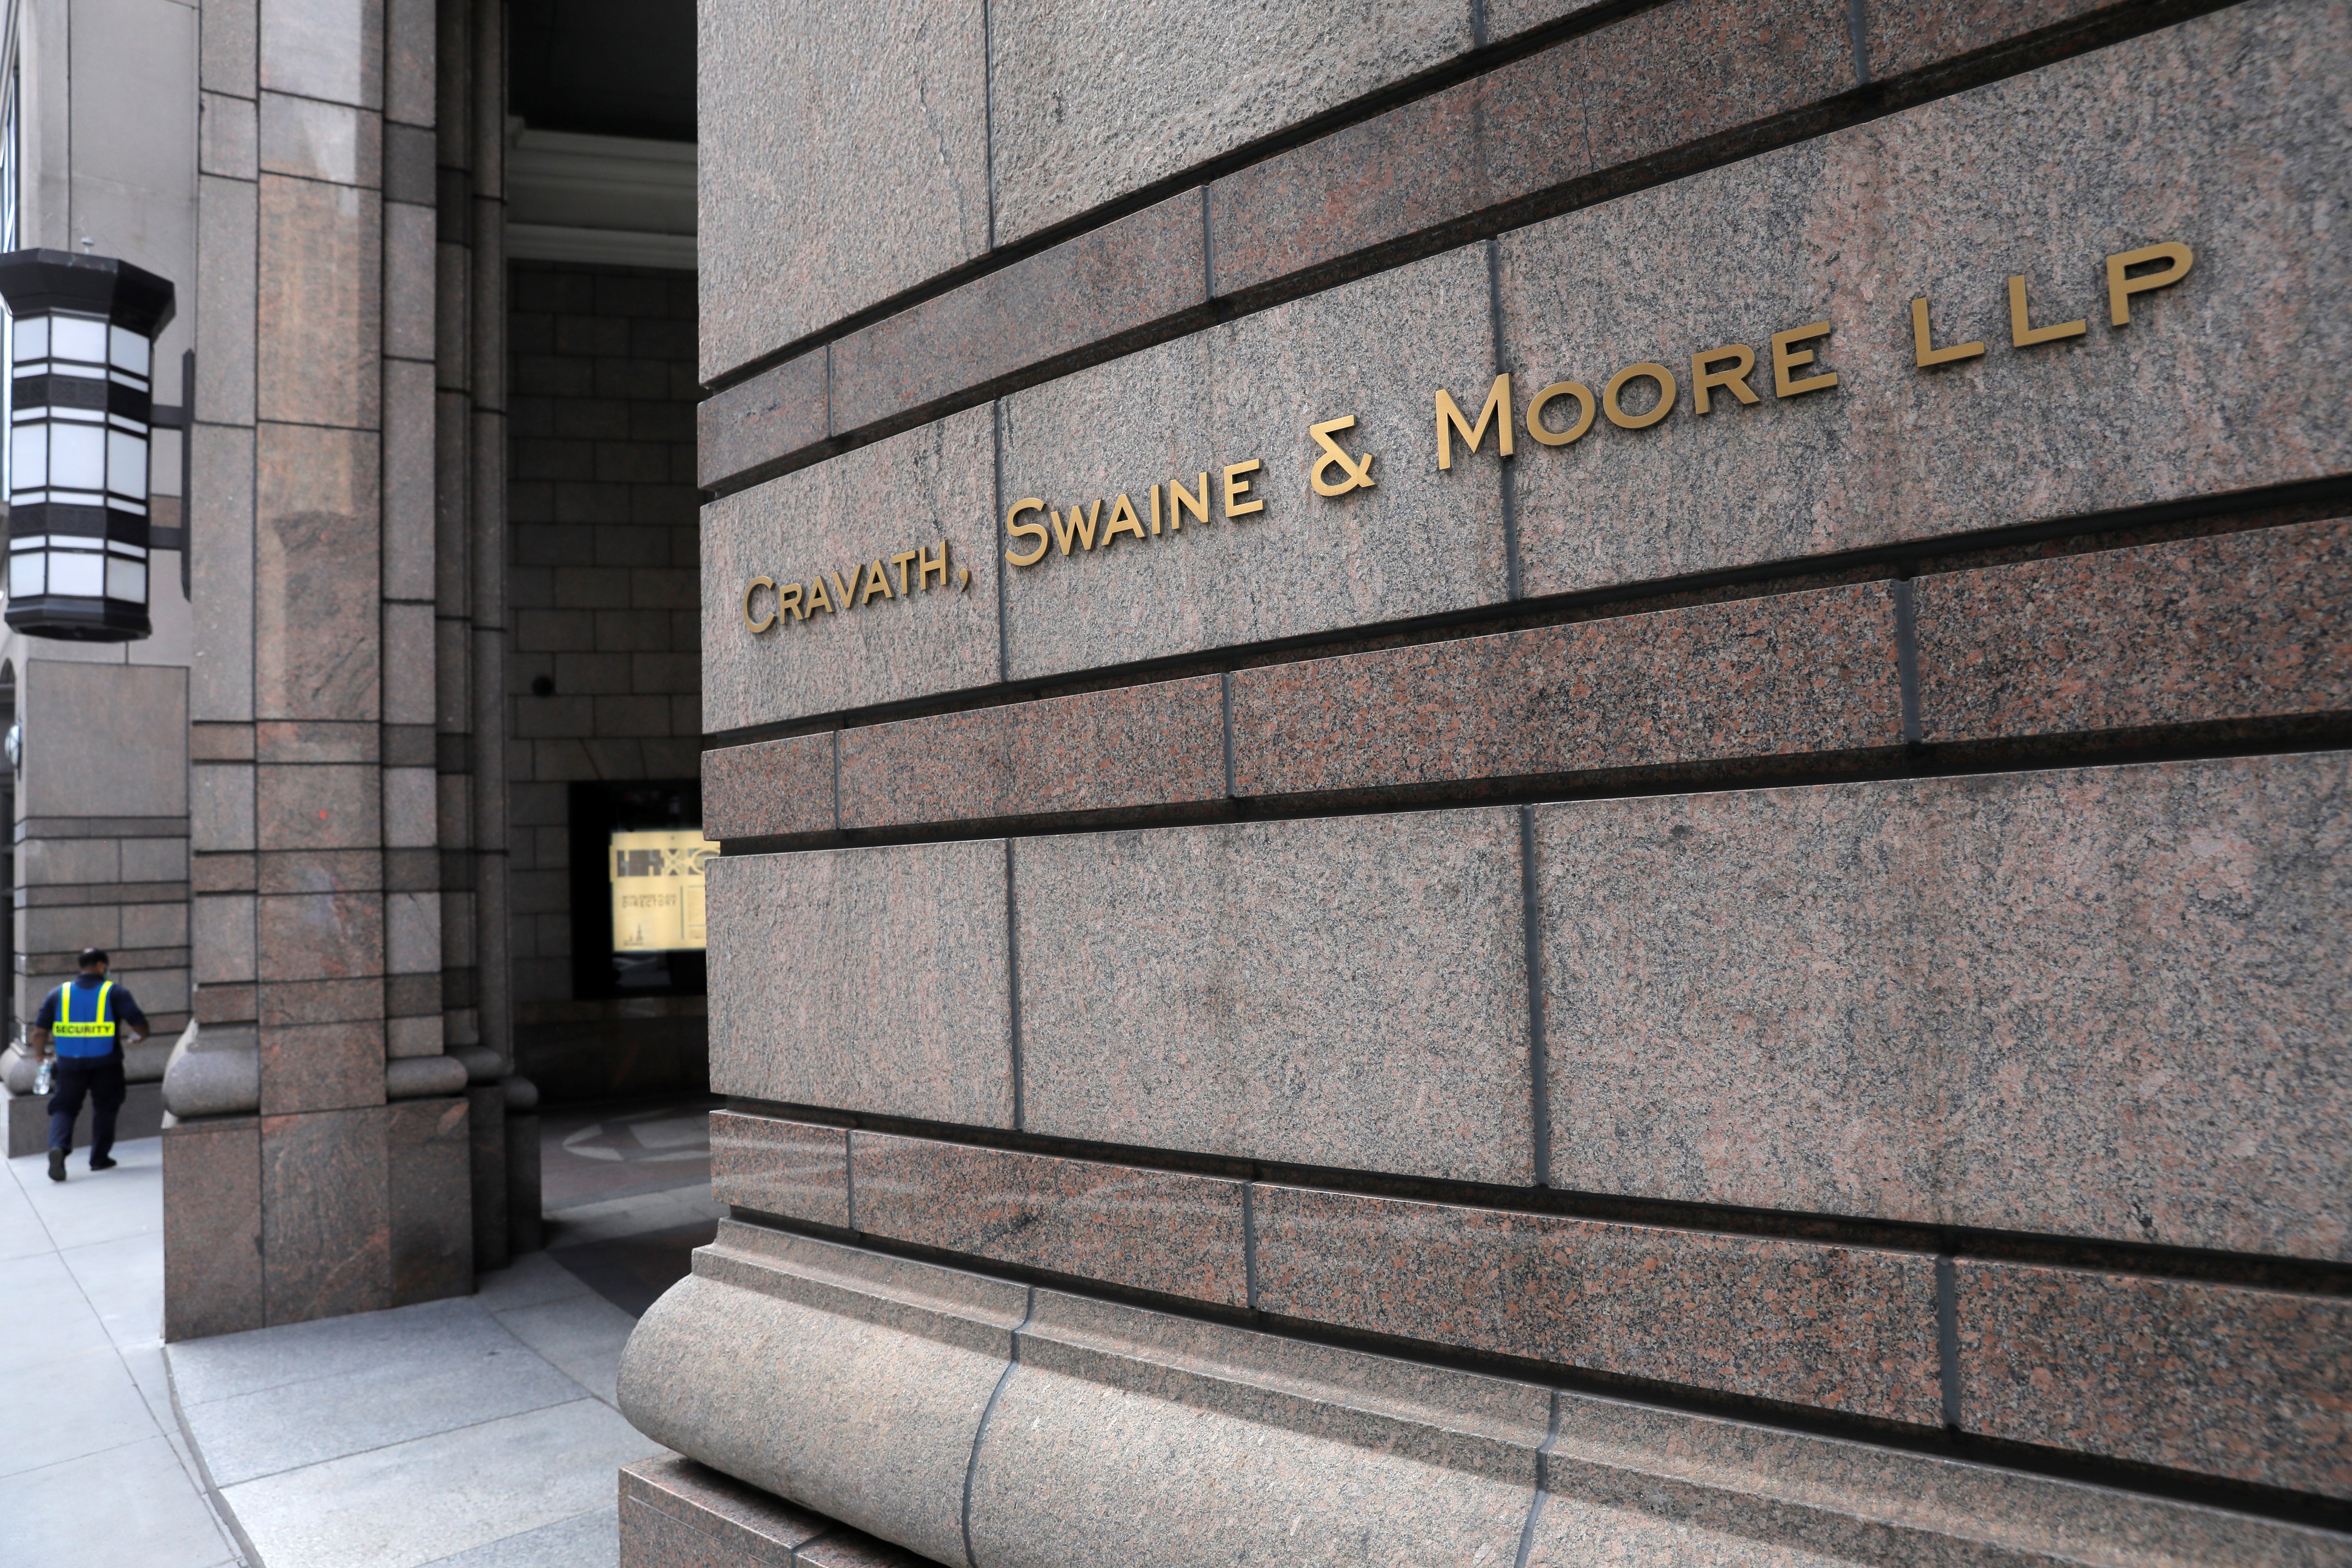 Signage is seen on the exterior of the building where law firm Cravath, Swaine & Moore LLP are located in Manhattan, New York City